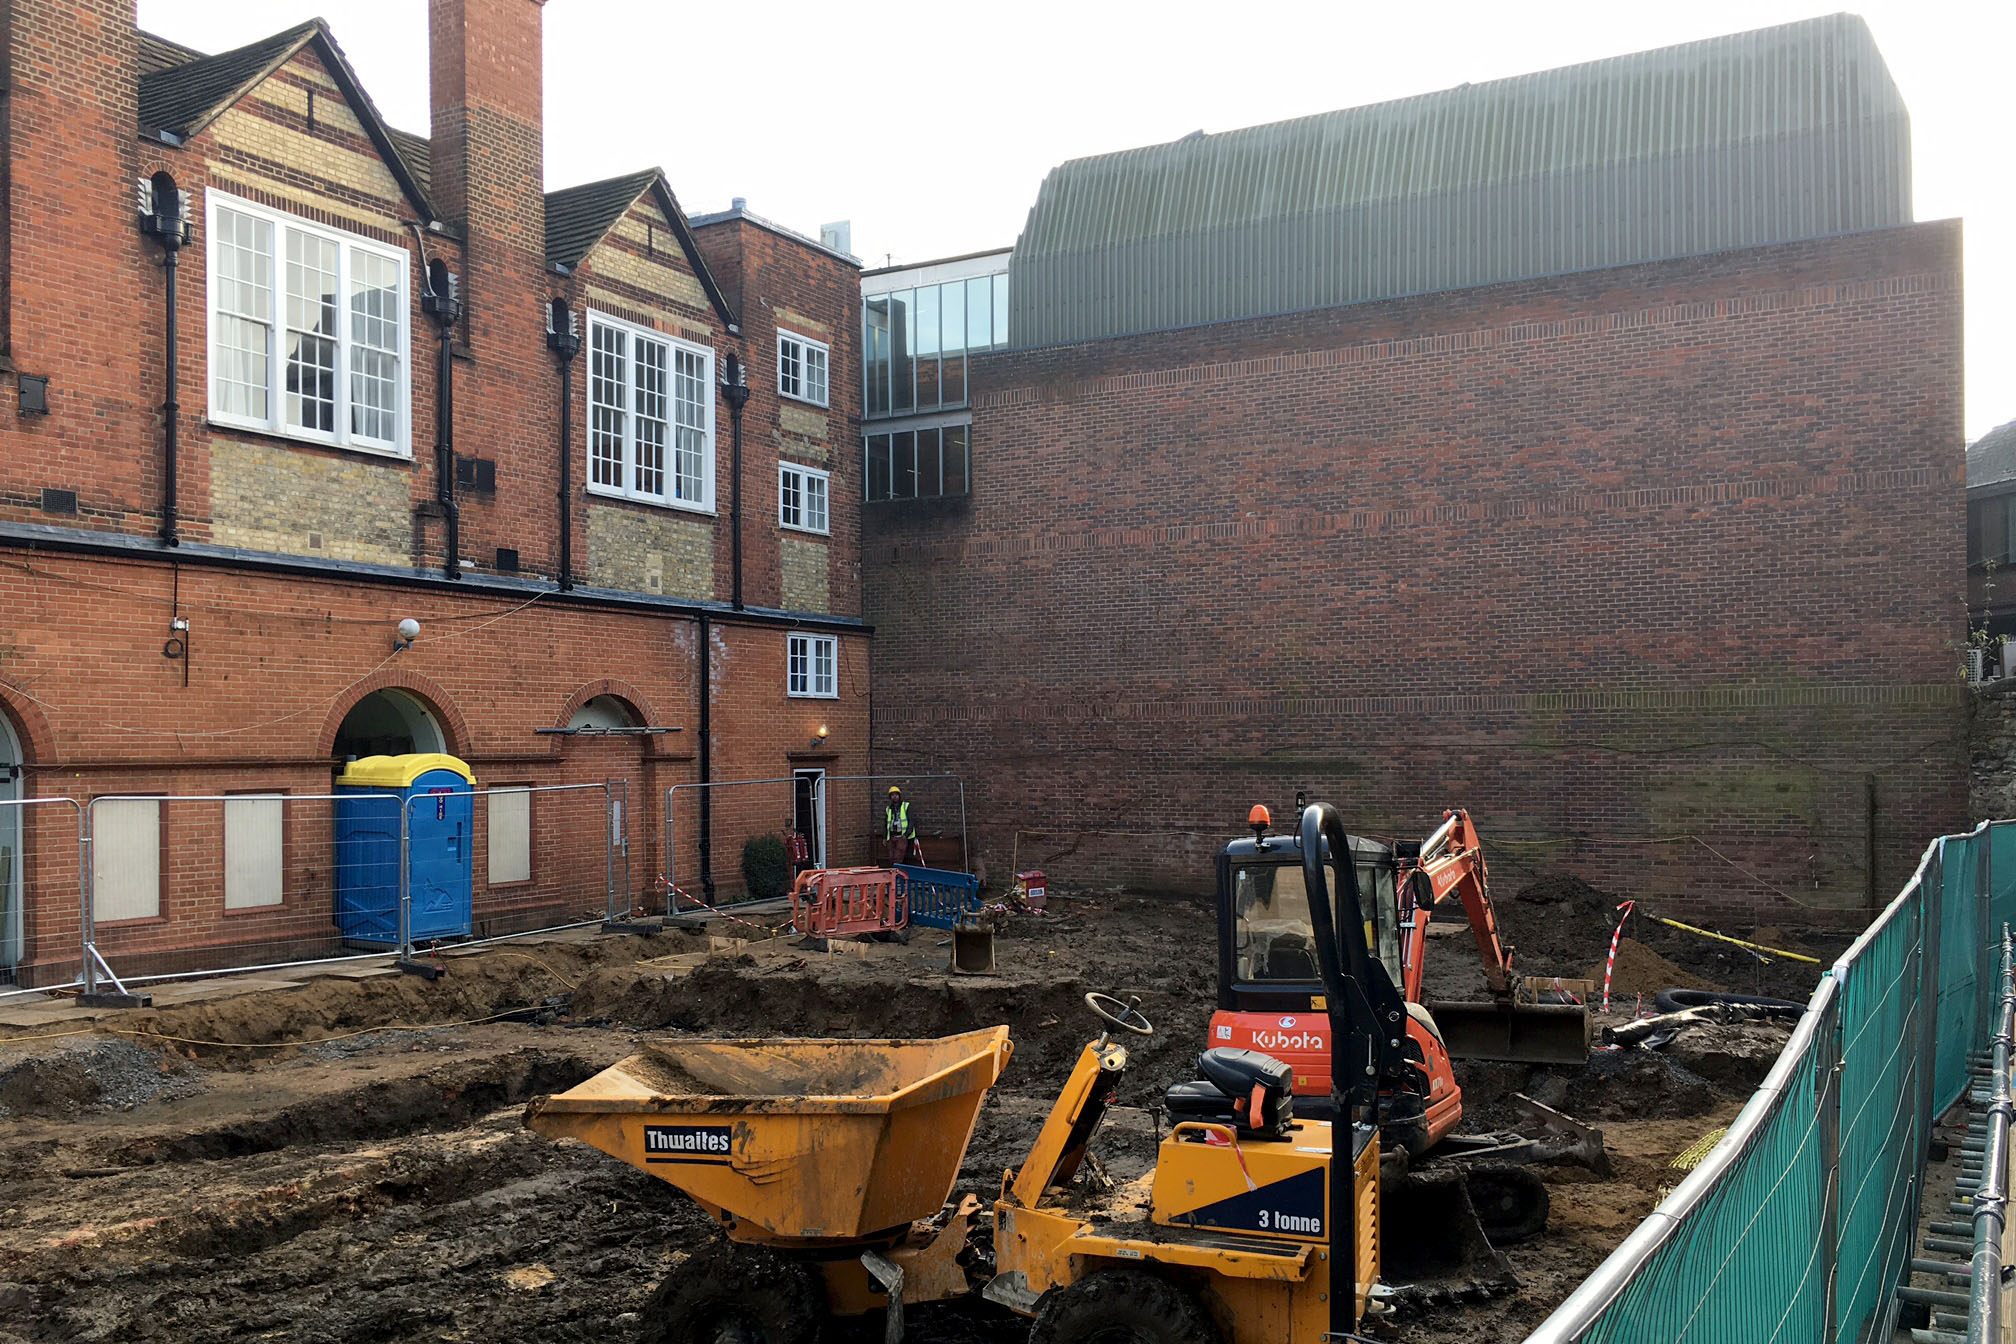 Construction work has started onsite at St. Peter's College, Oxford ...